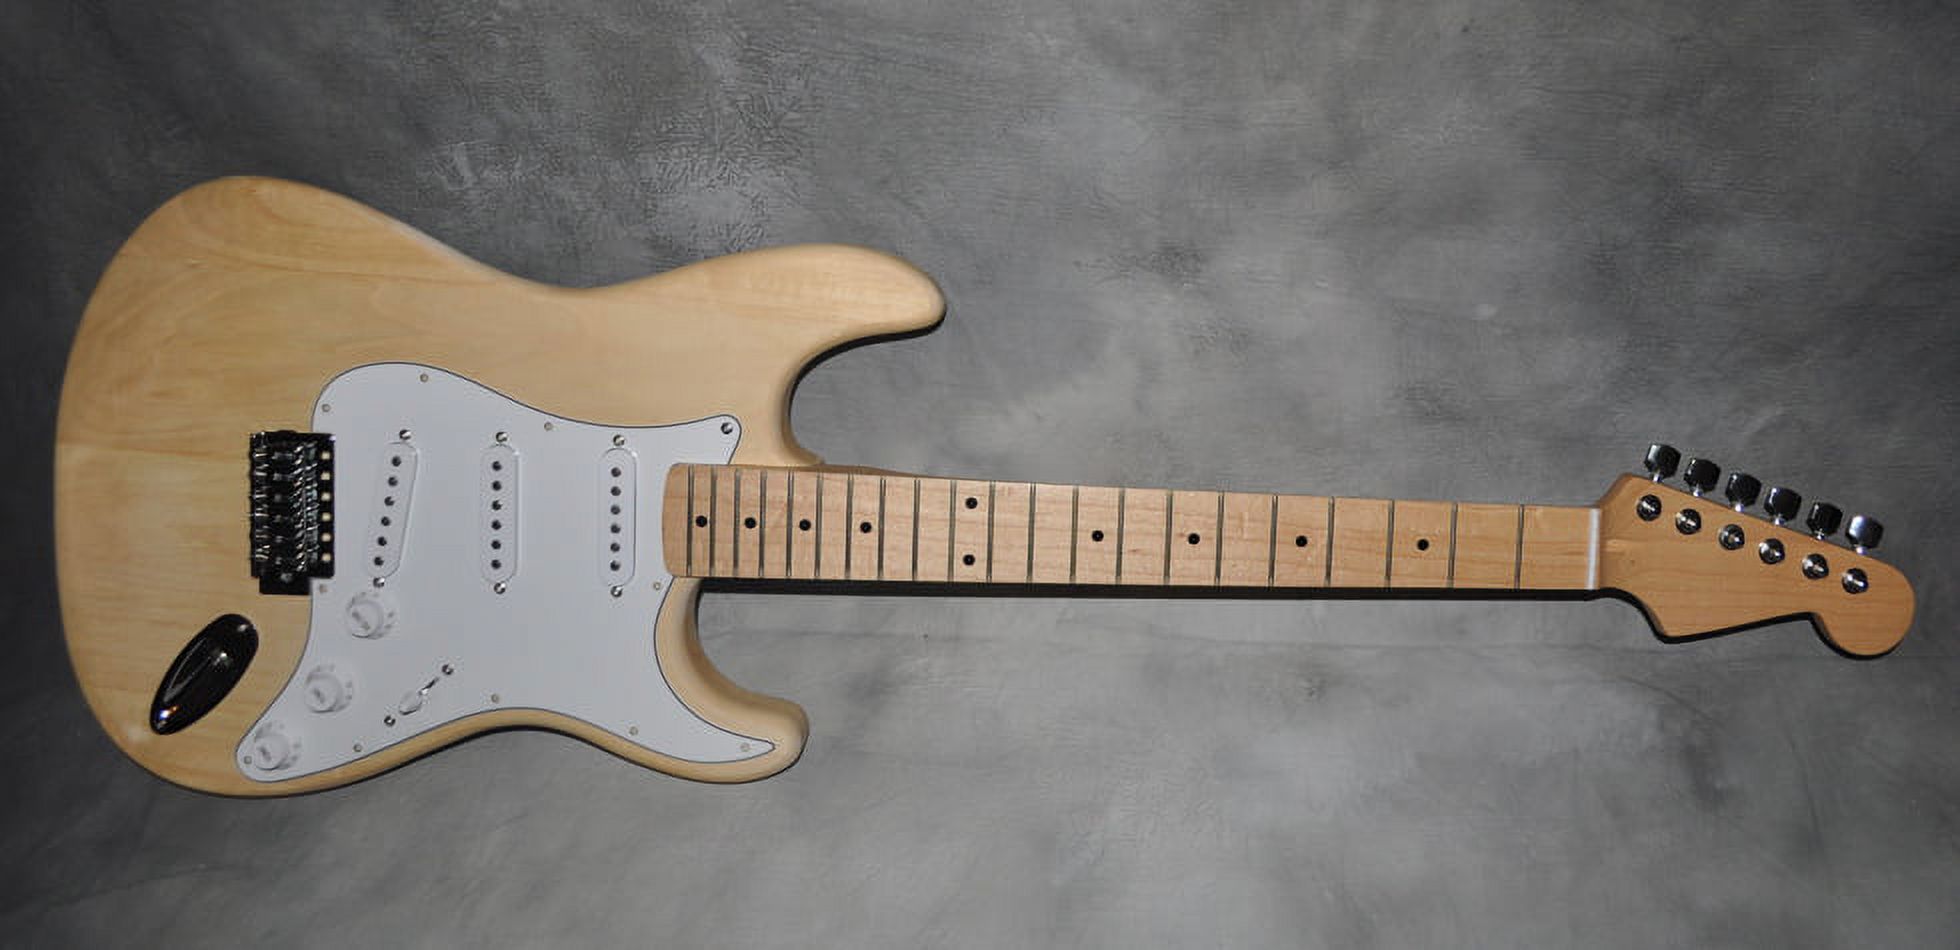 RSW DIY Electric Guitar kit with Basswood Body Maple Neck and Fingerboard 21 Frets S-S-S Pickups Bolt On - image 4 of 6